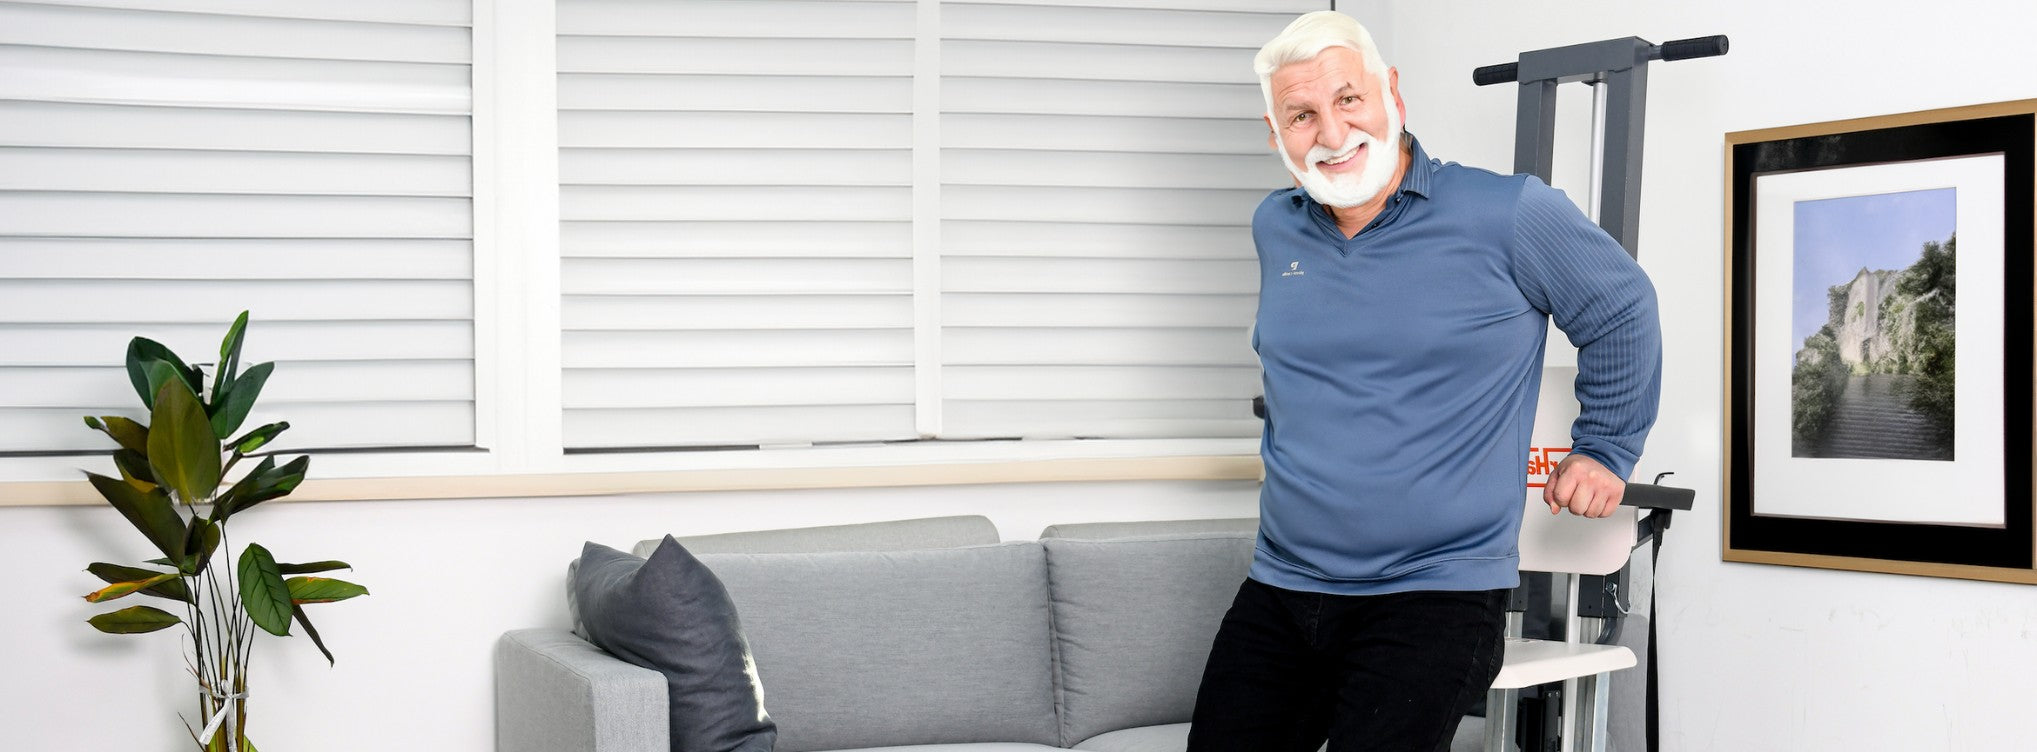 a man with white hair and beards standing on a couch